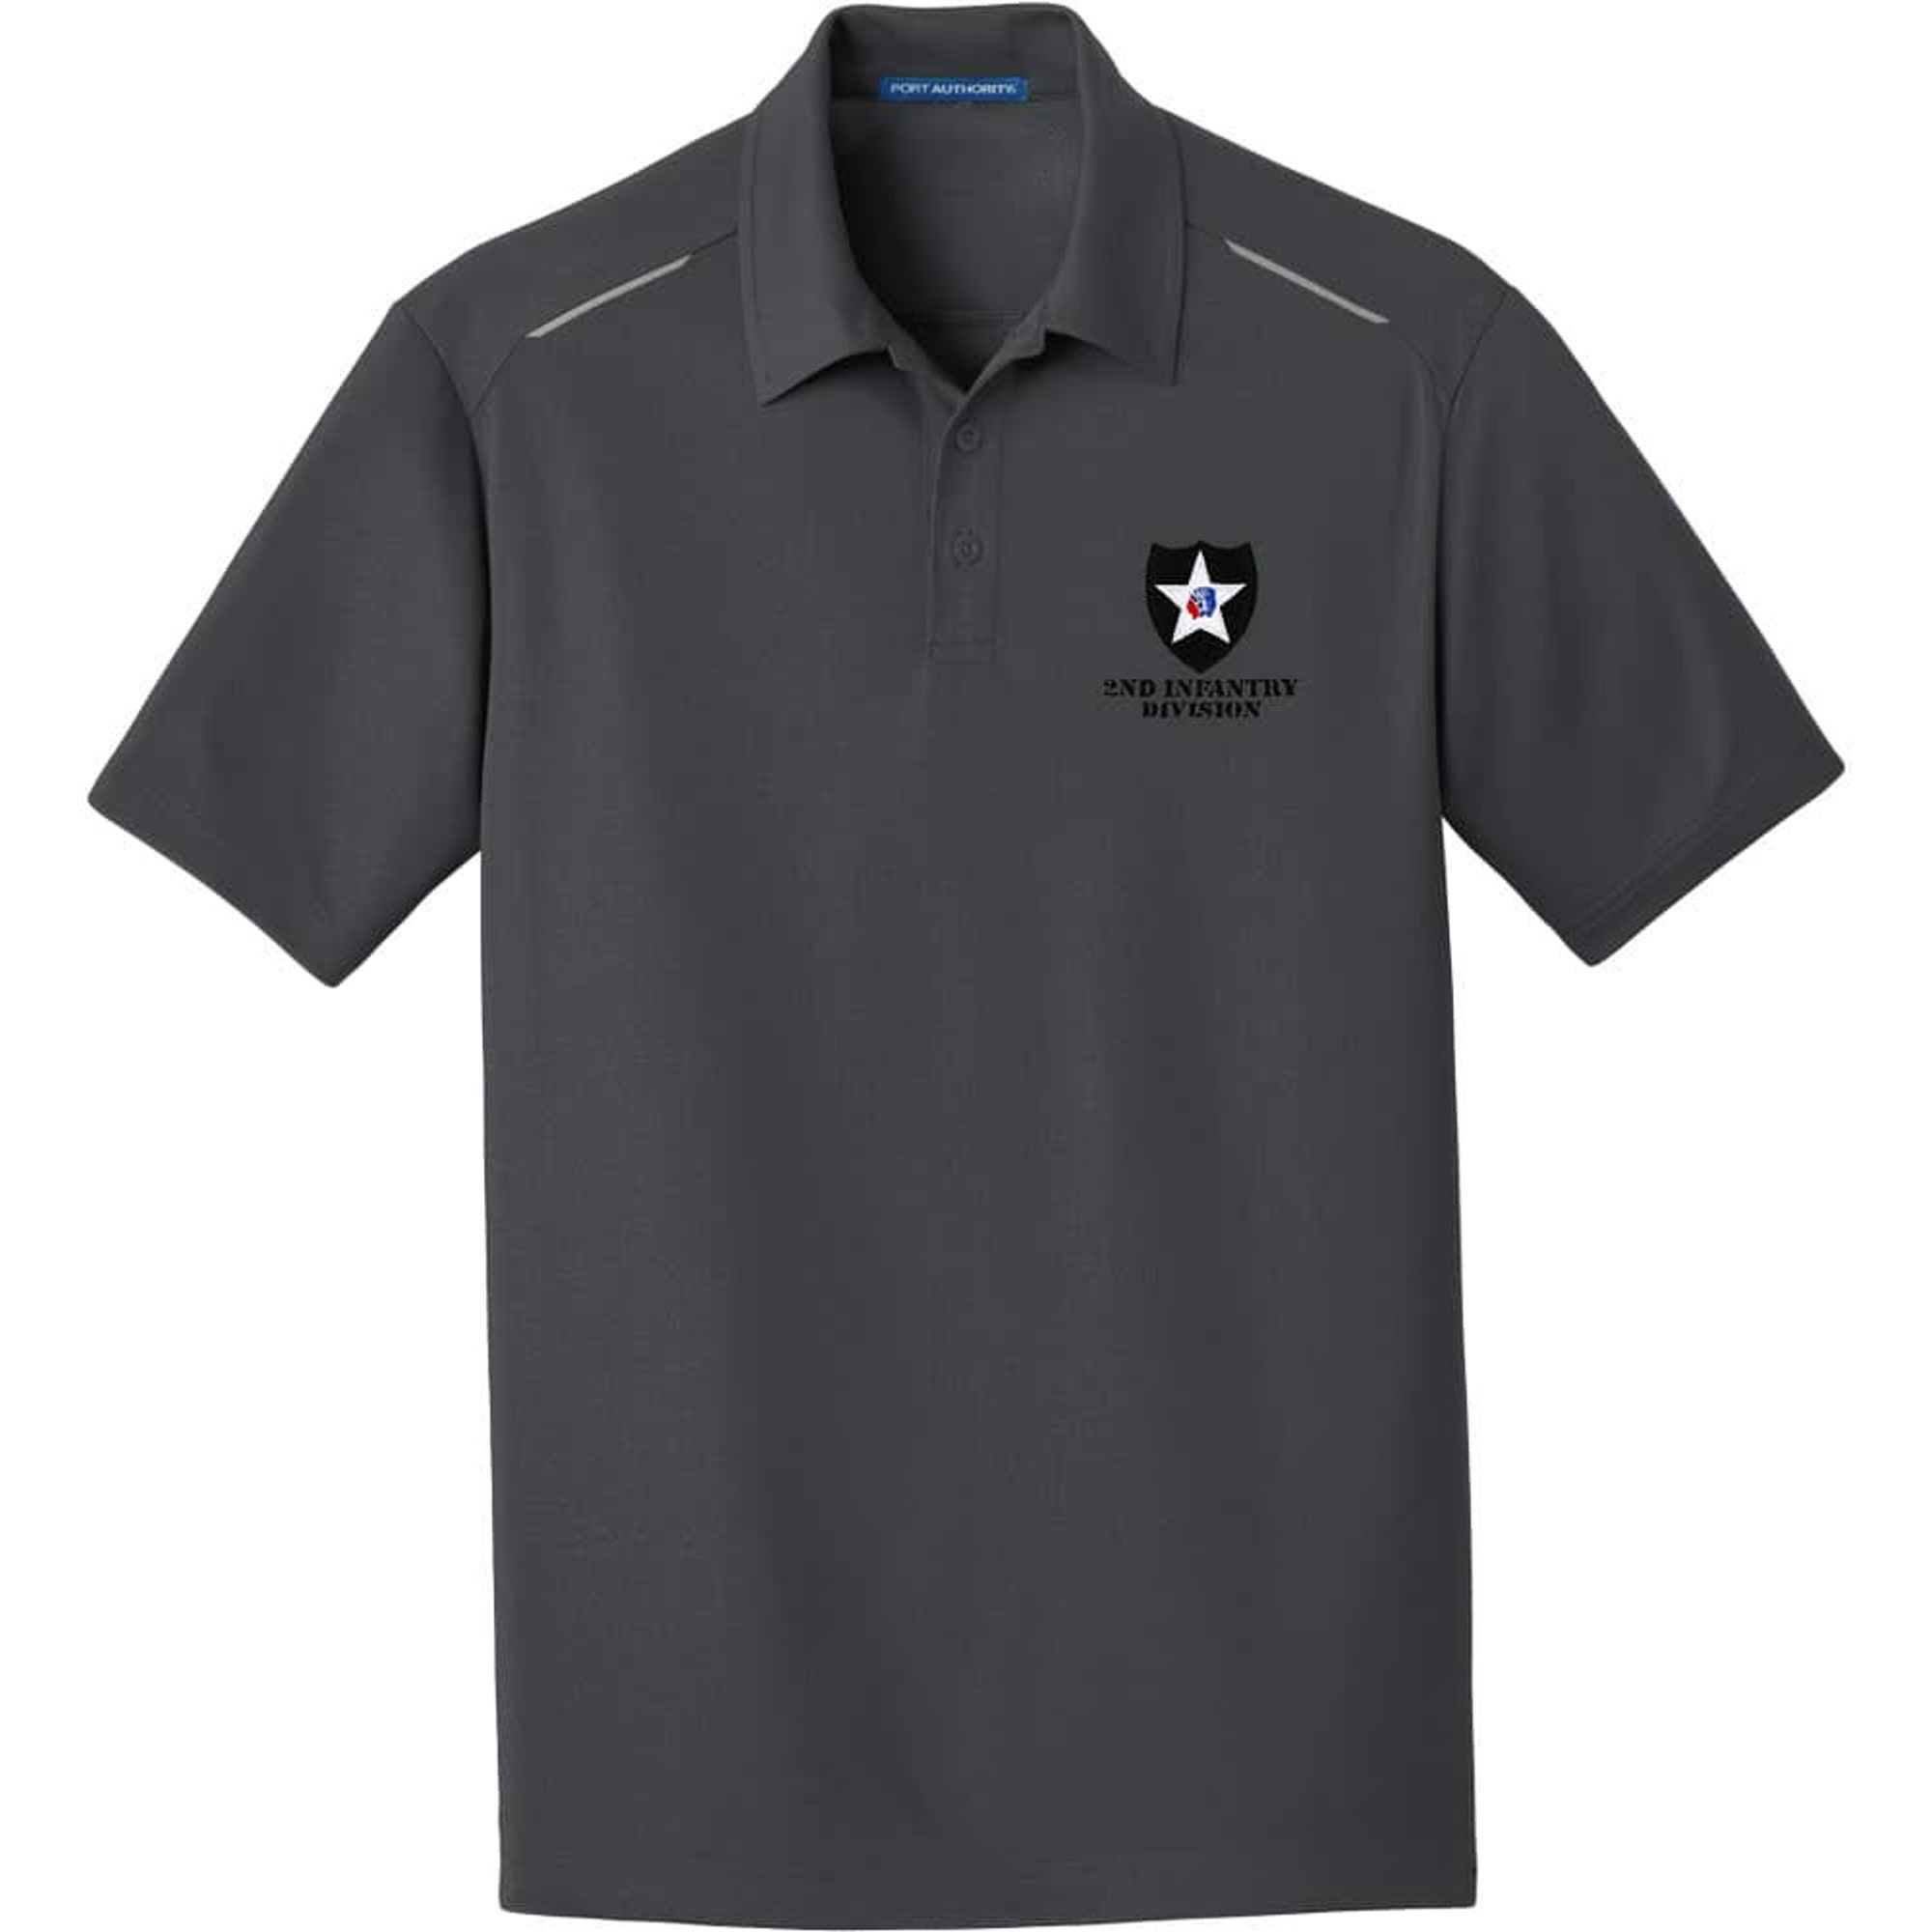 2nd Infantry Division Embroidered Performance Golf Polo